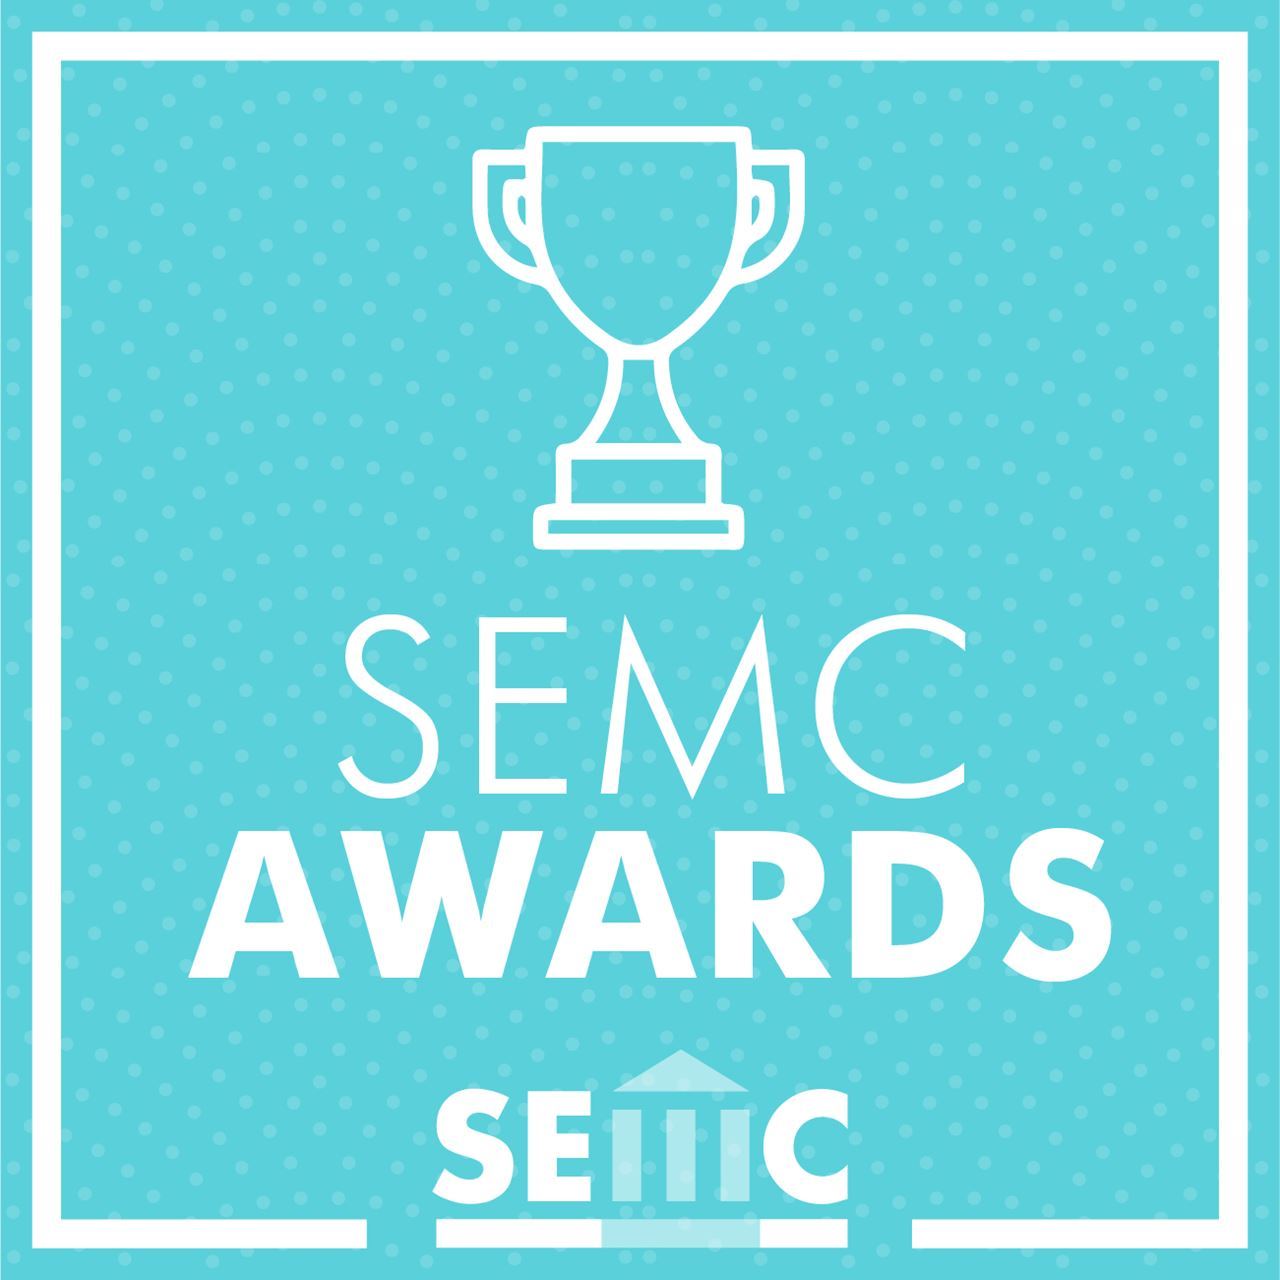 Blue polka-dotted background, with a graphic of a trophy and the words “SEMC AWARDS” centered. The SEMC logo is also at the bottom. 